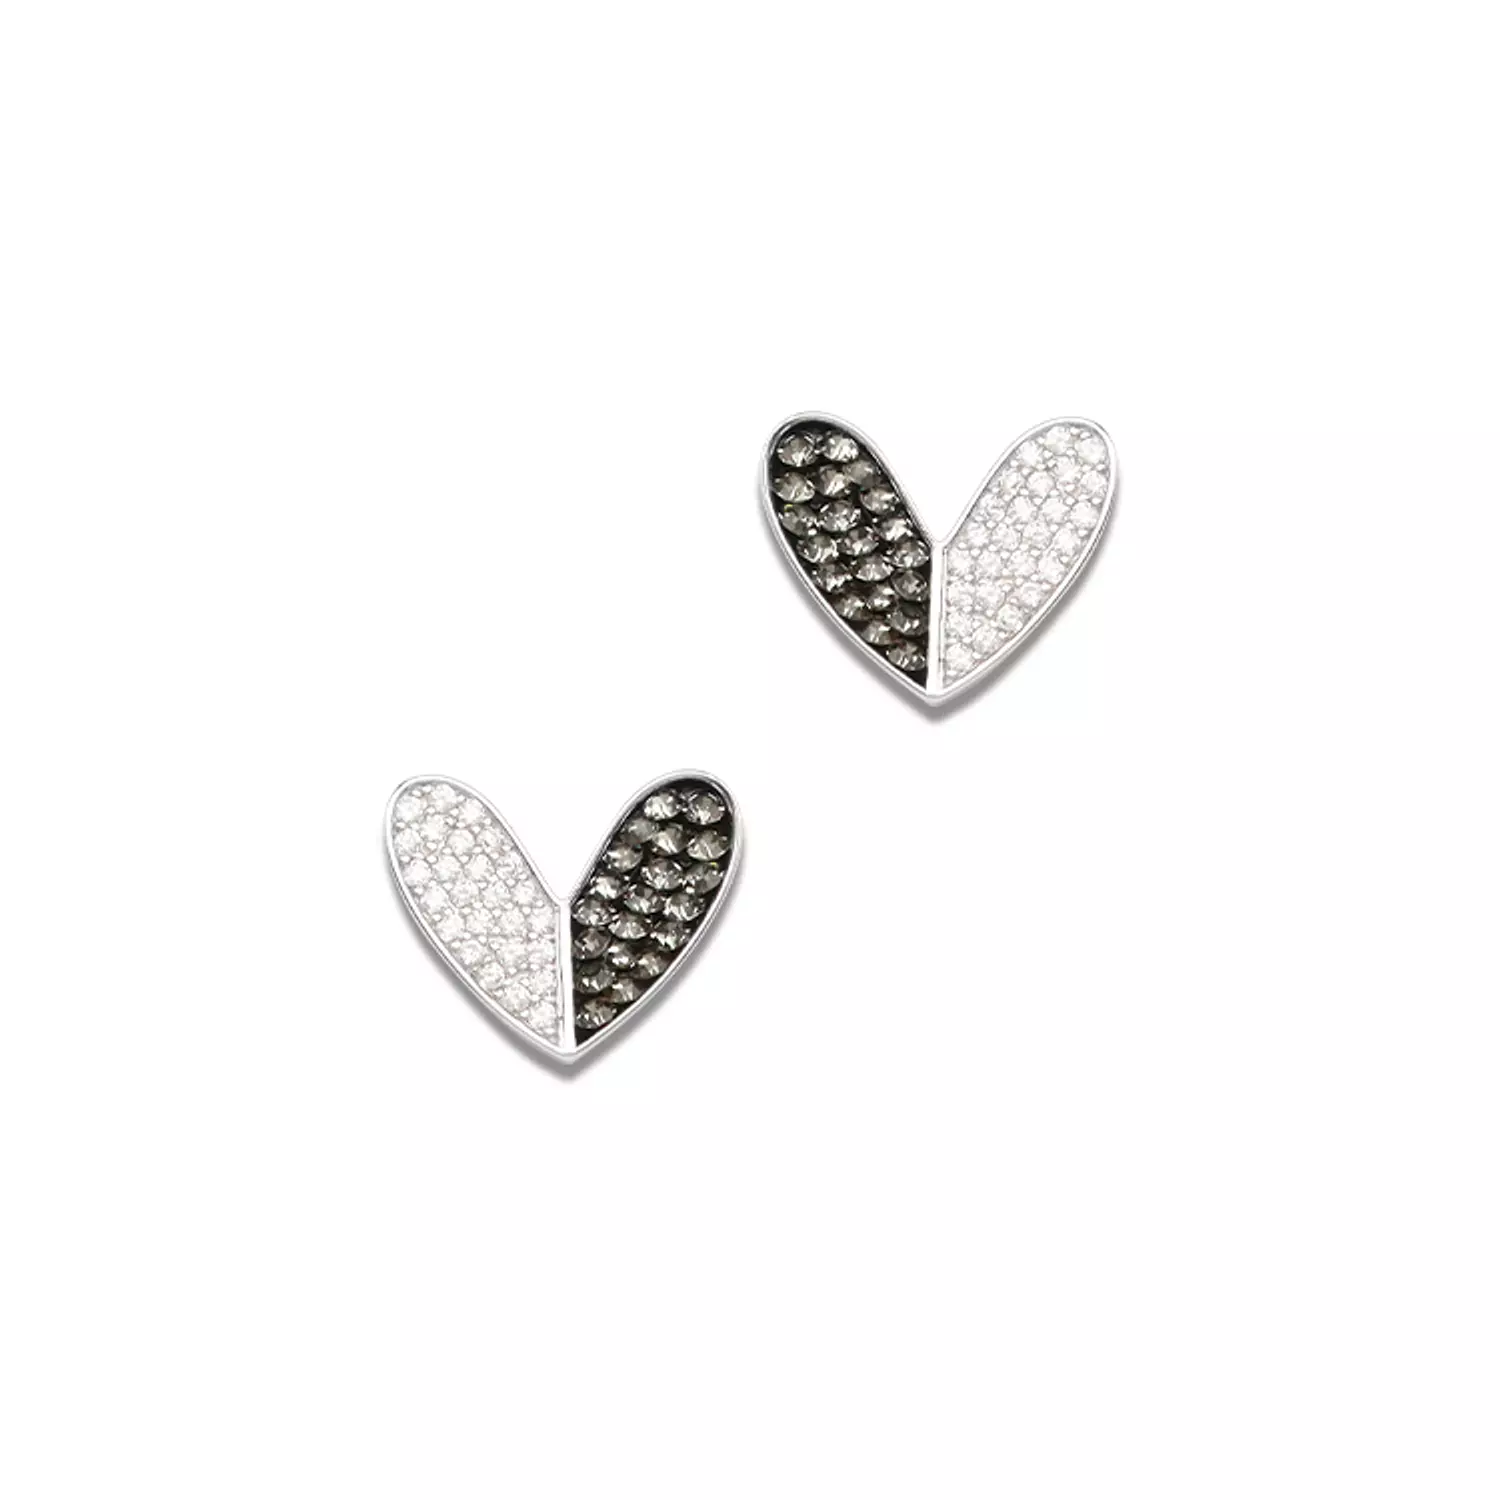 Silver Earrings hover image